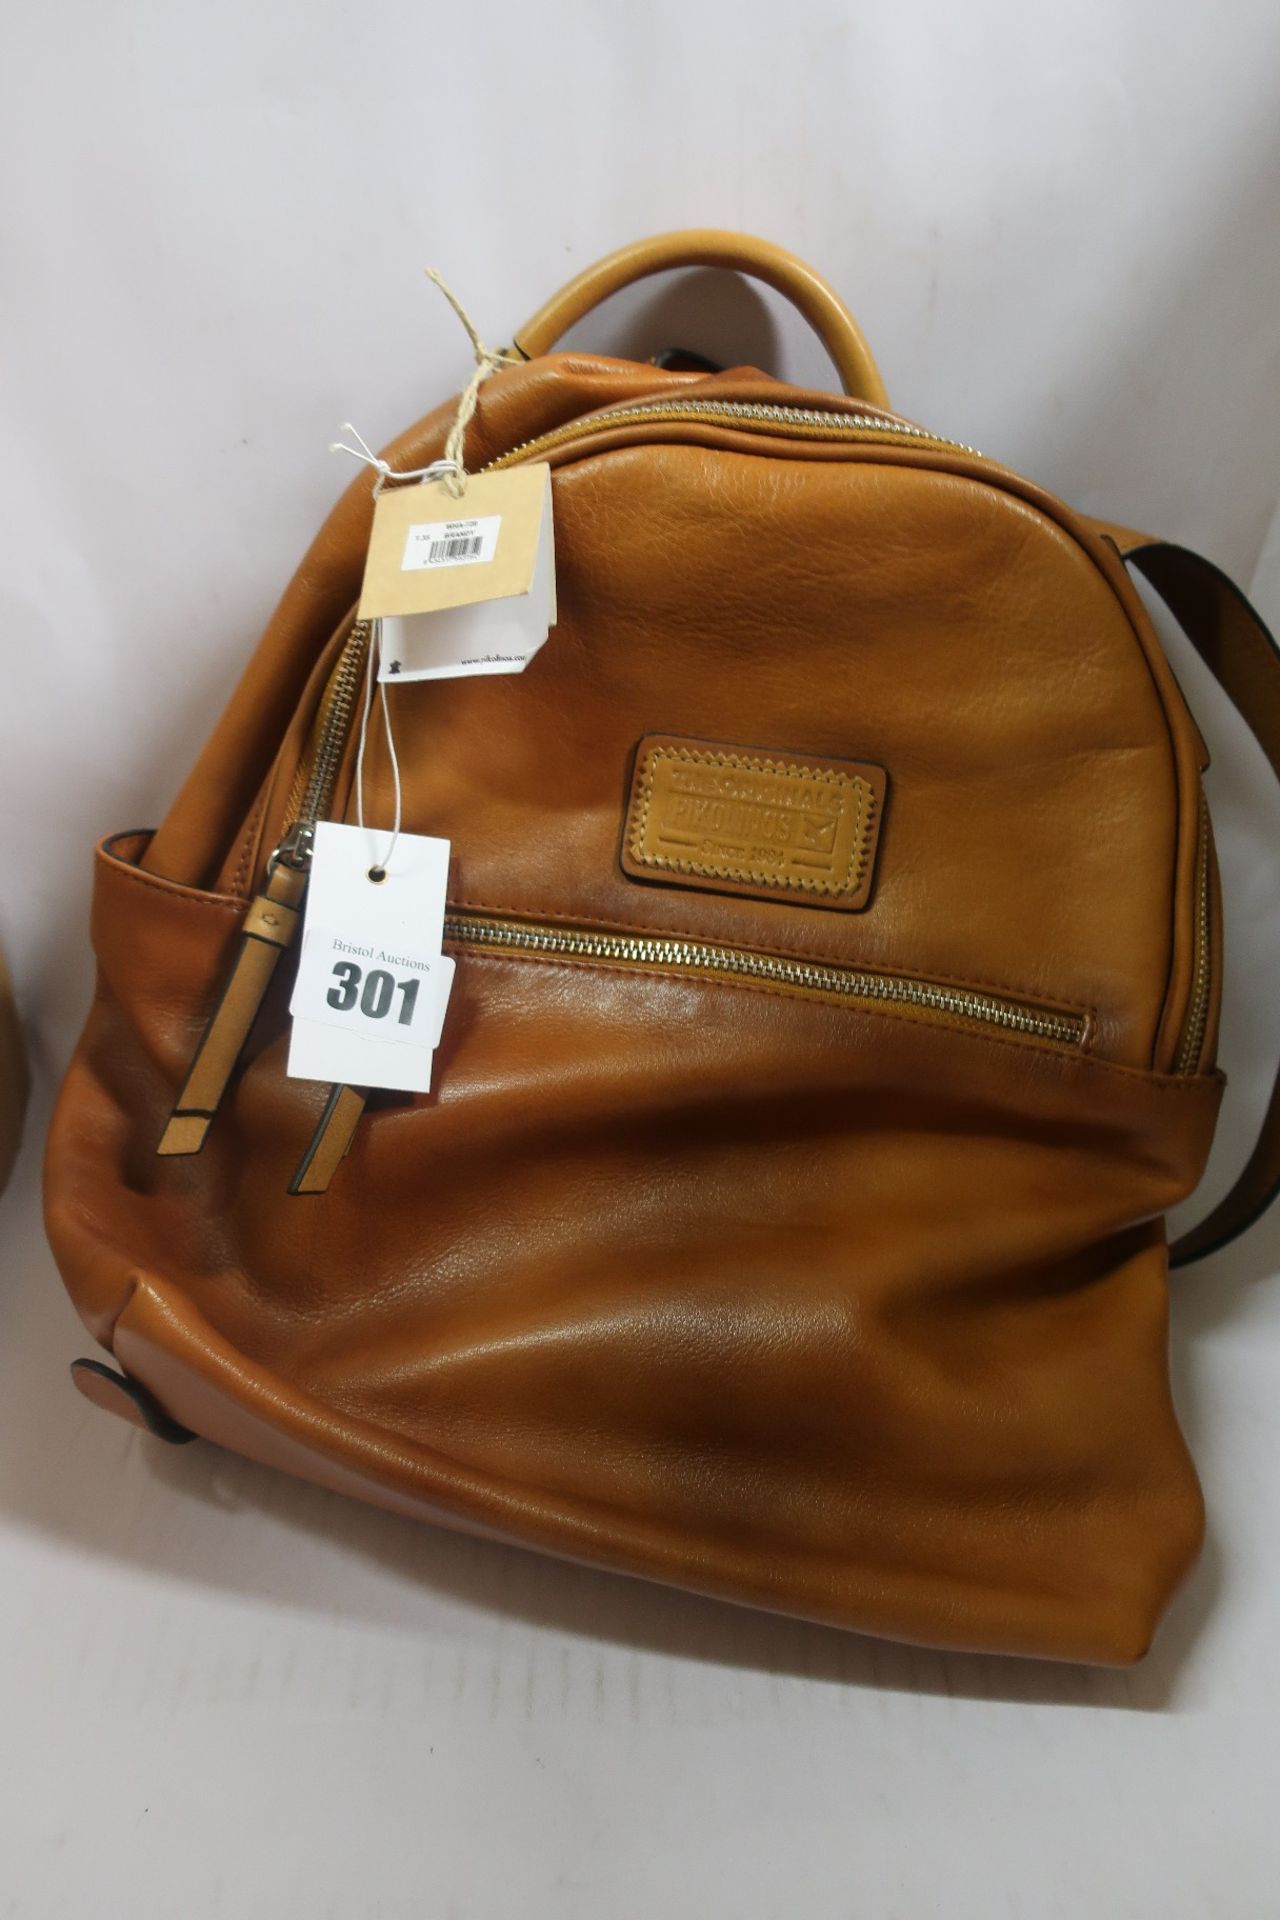 An as new Pikolinos WHA leather backpack in brandy (RRP €150) with dust bag.